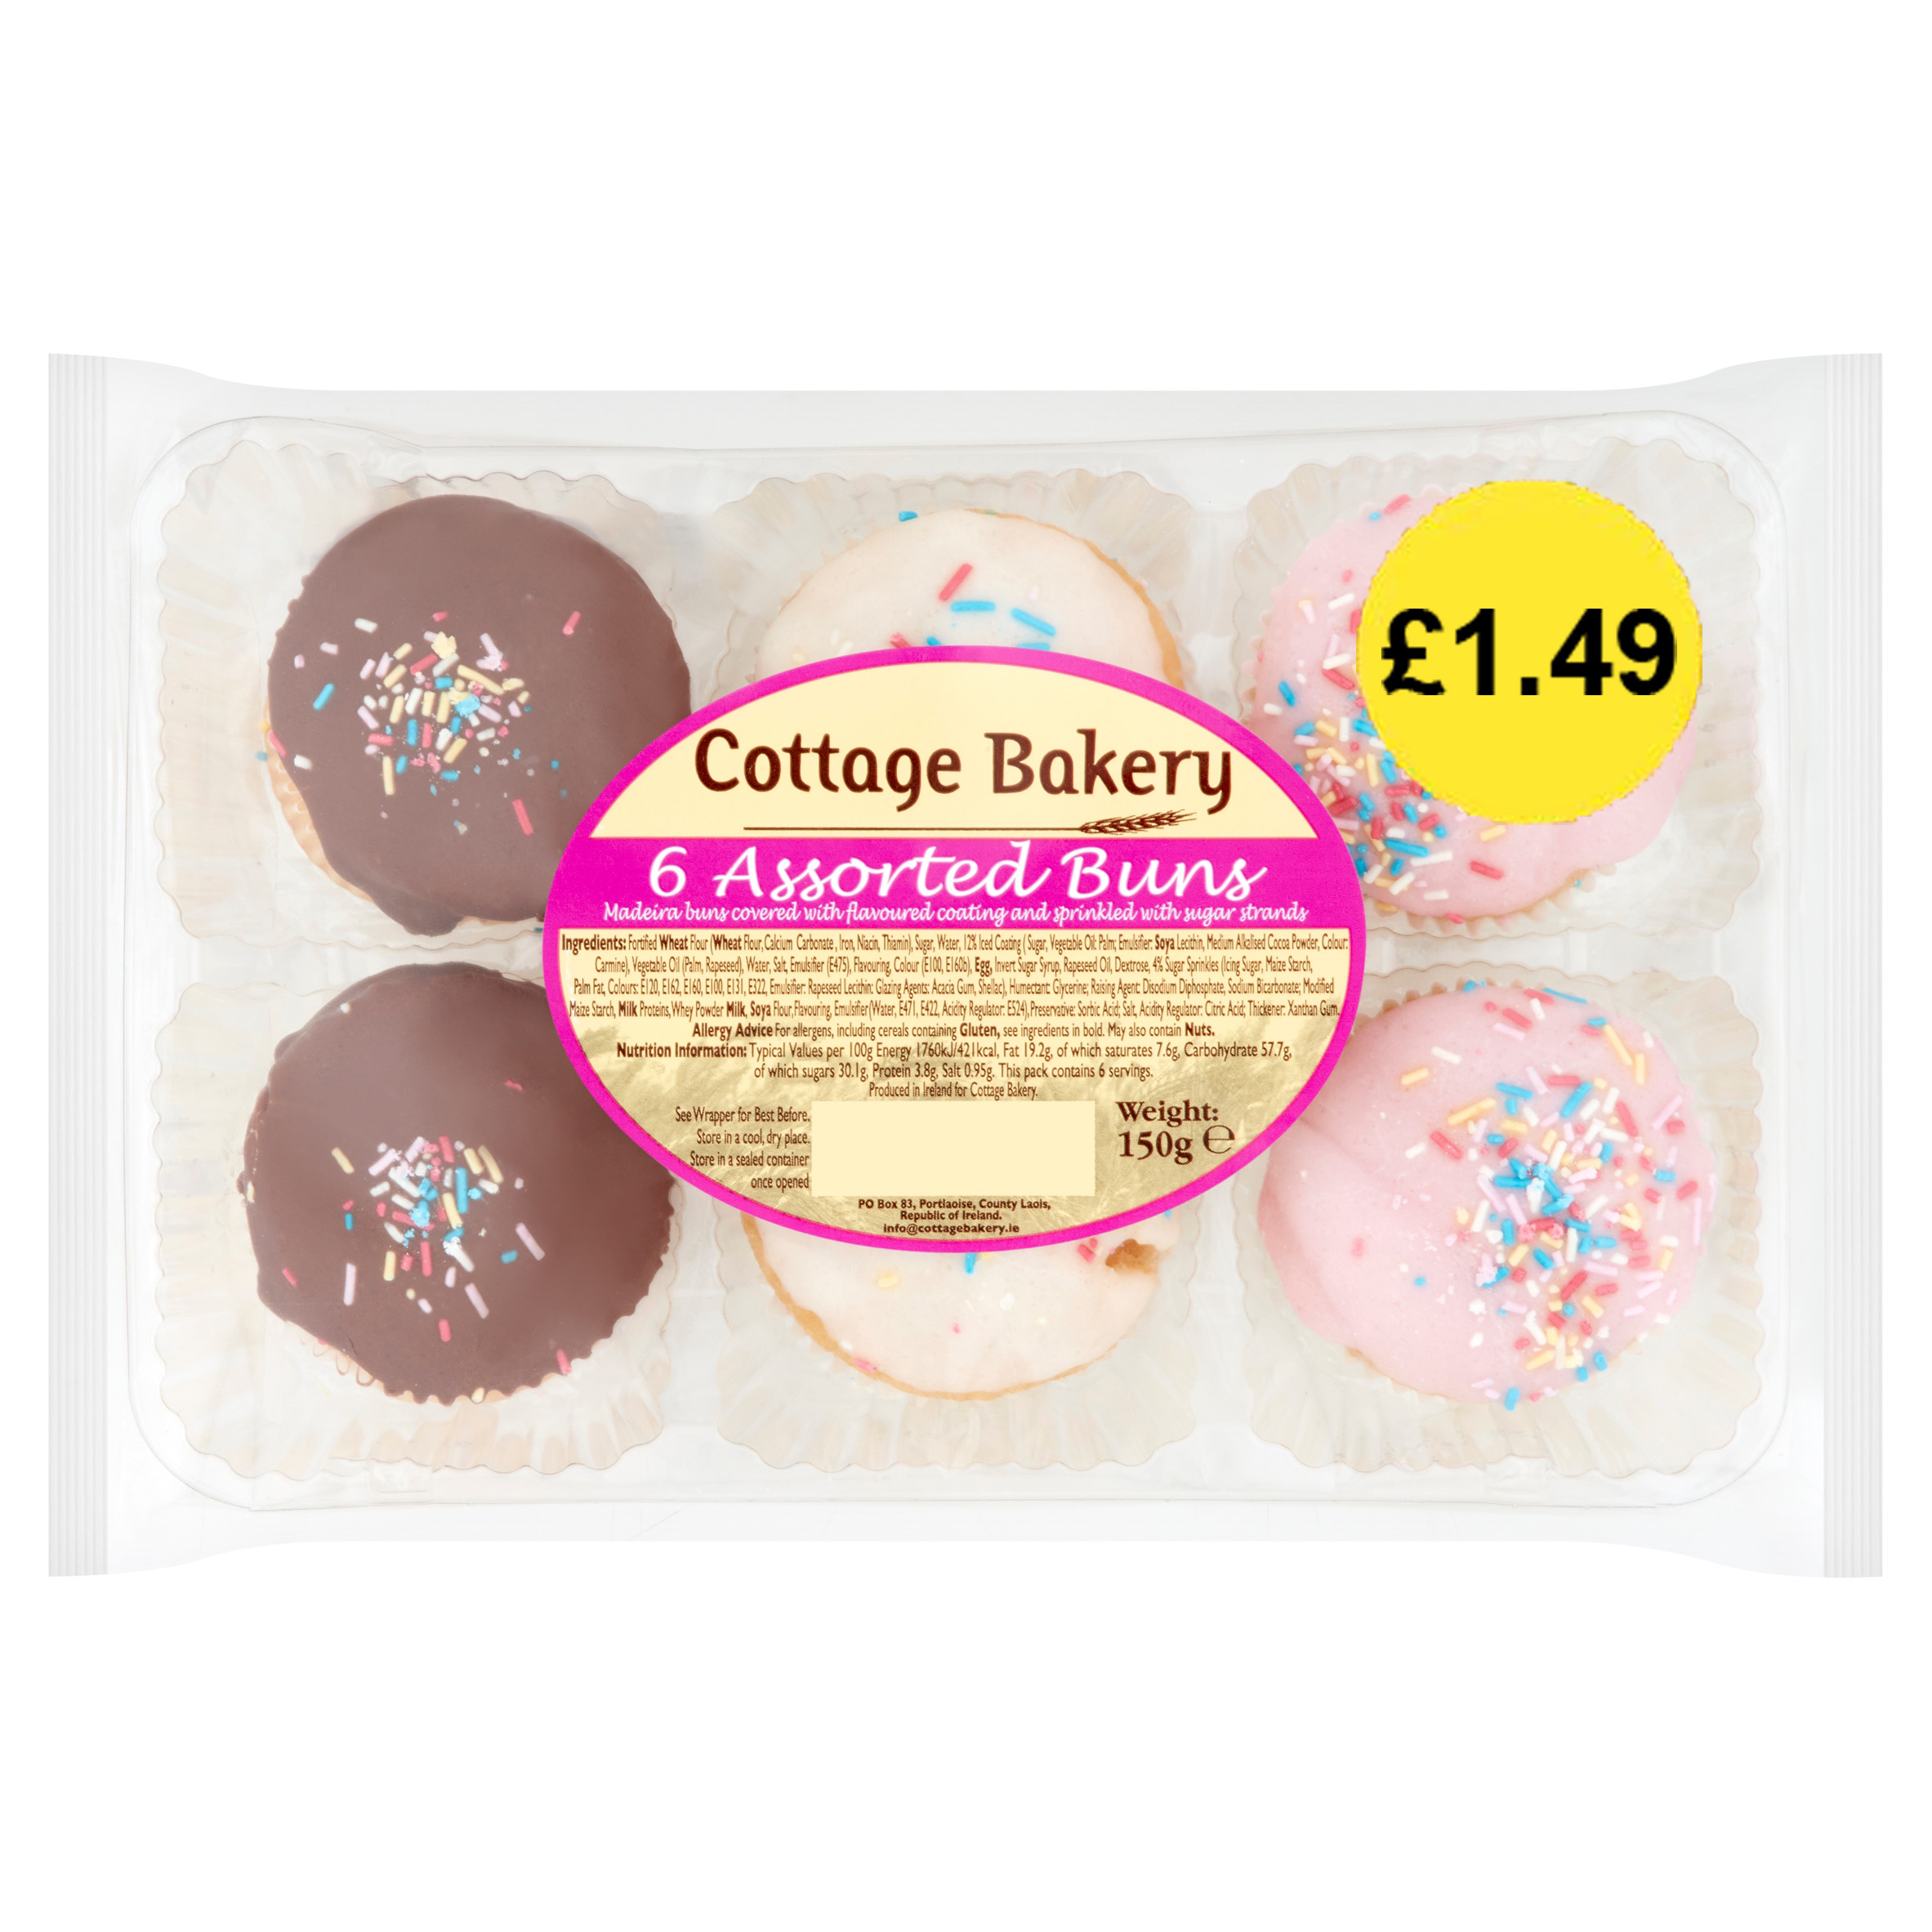 Cottage Bakery 6 Assorted Buns (Jan 23 - Feb 24) RRP £1.49 CLEARANCE XL 89p each or 2 for £1.50